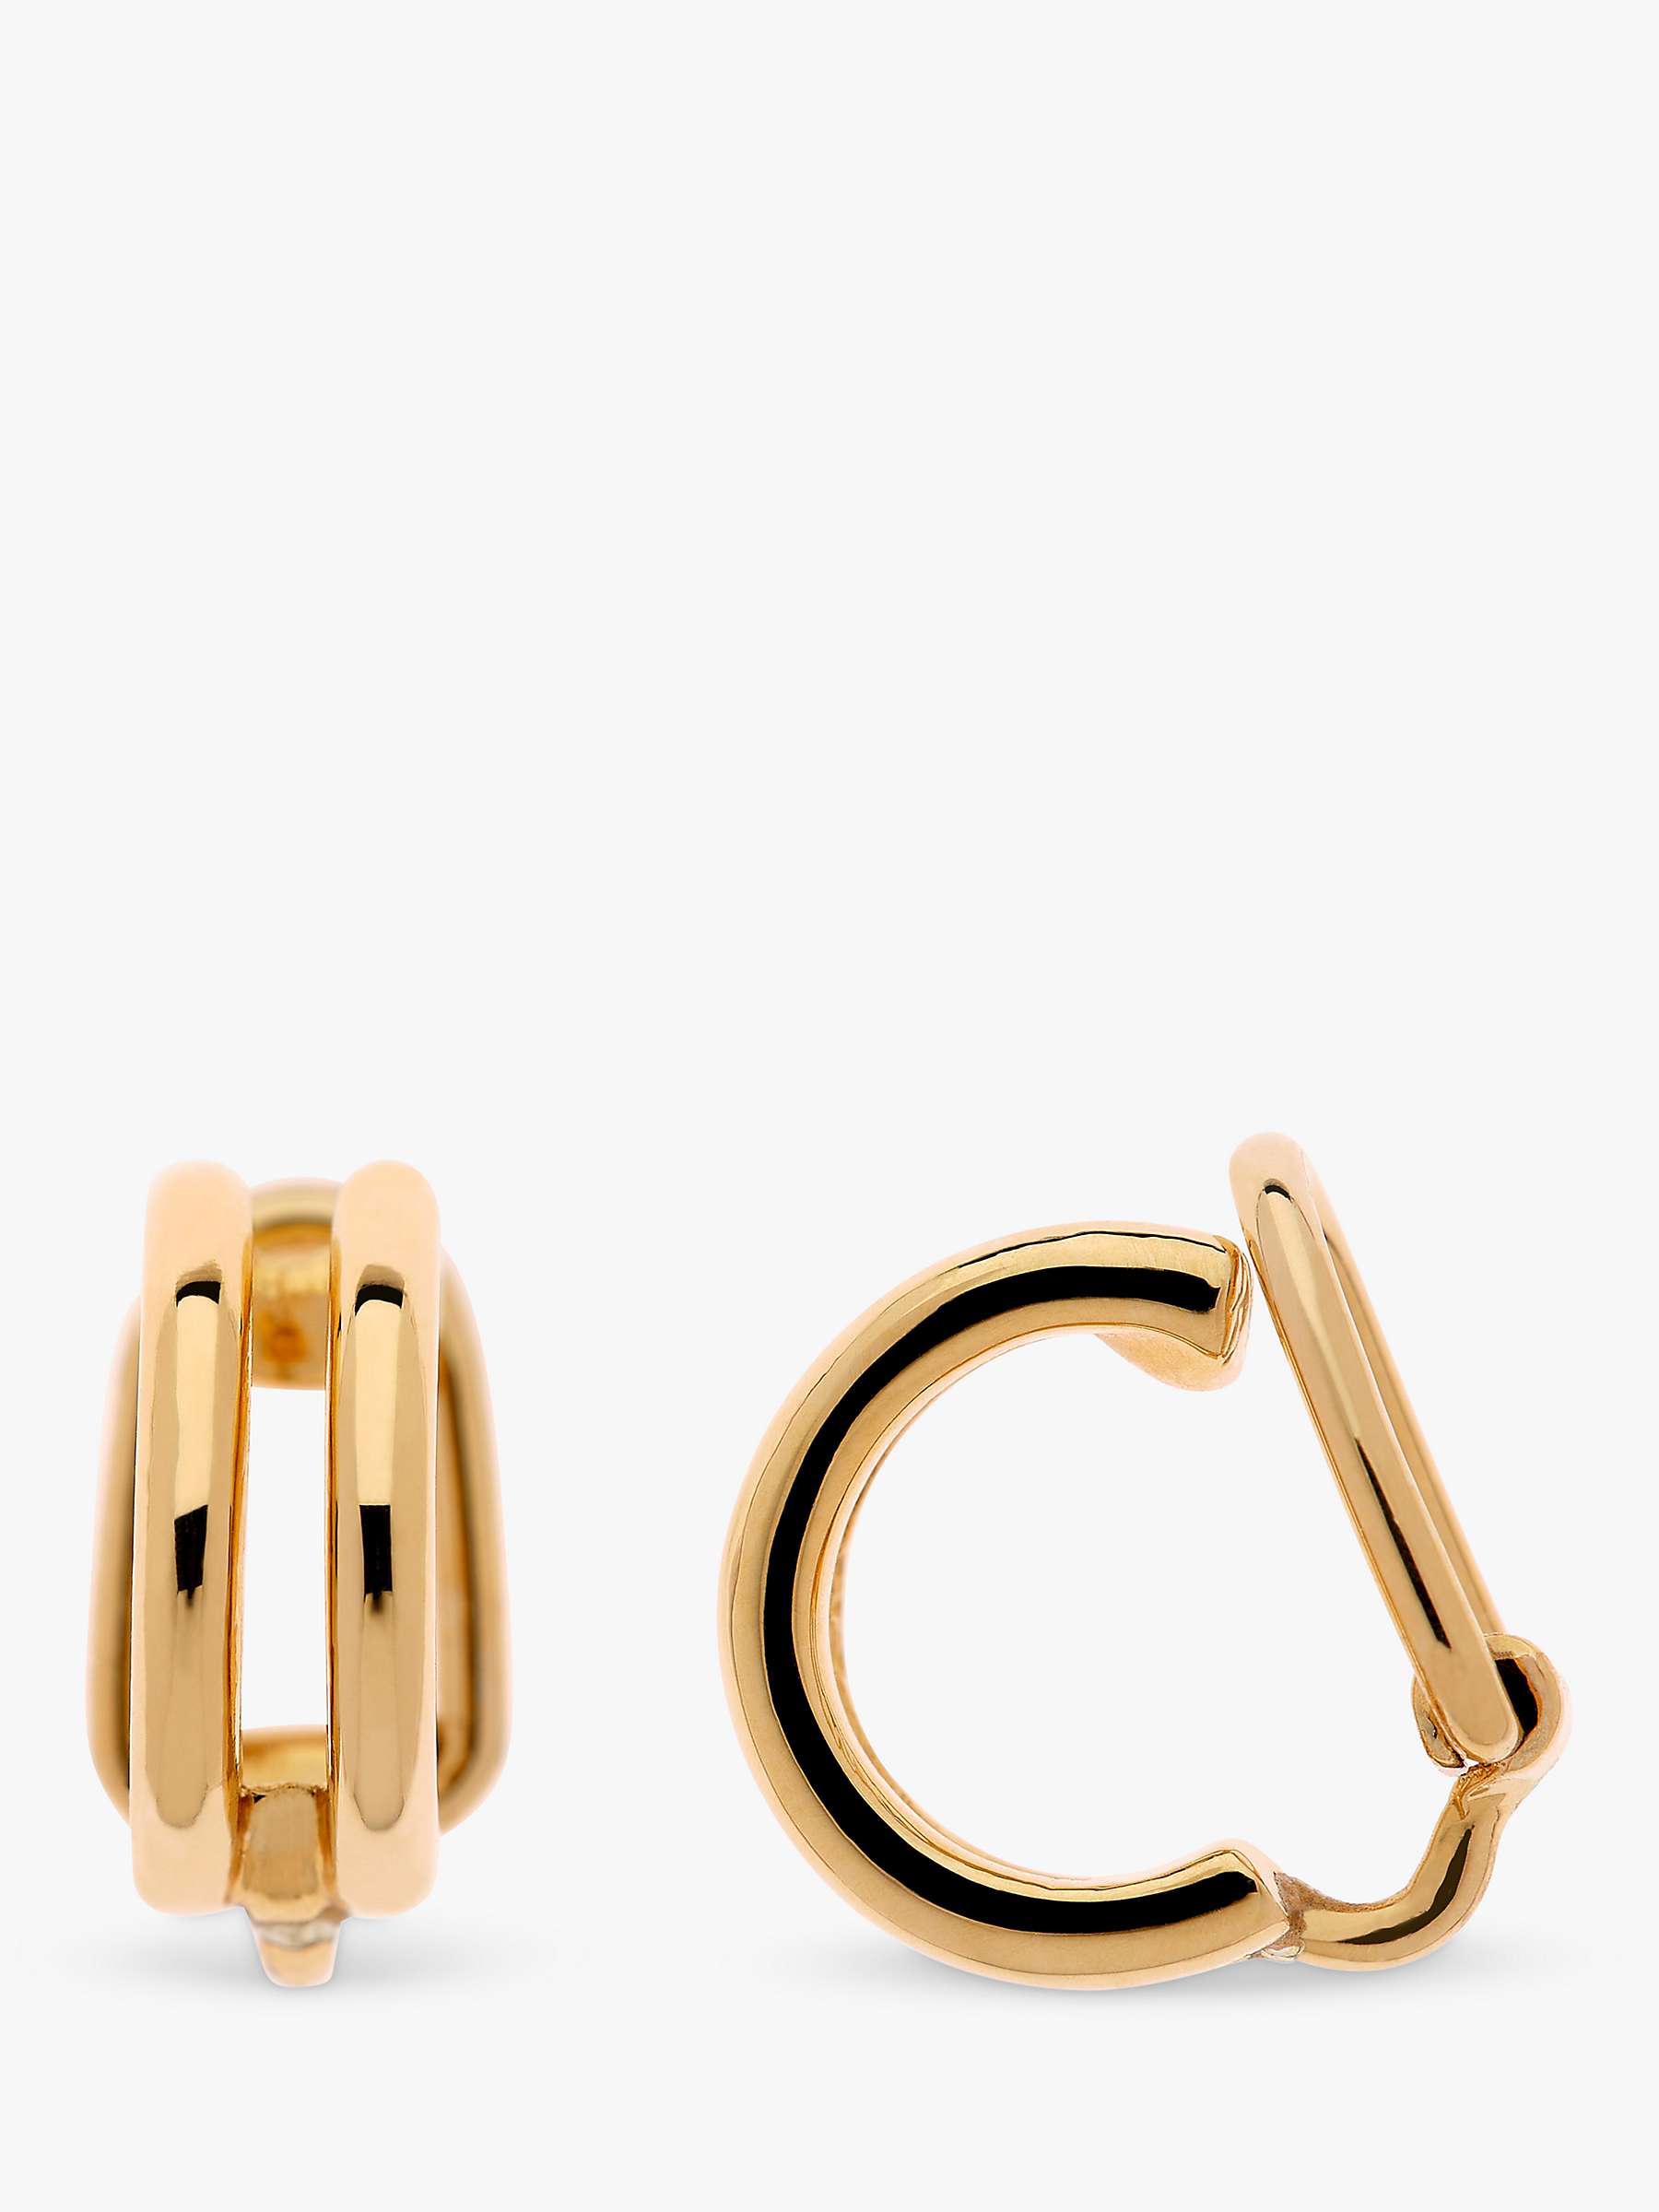 Buy Emma Holland Double Ear Cuff Clip-On Earrings Online at johnlewis.com